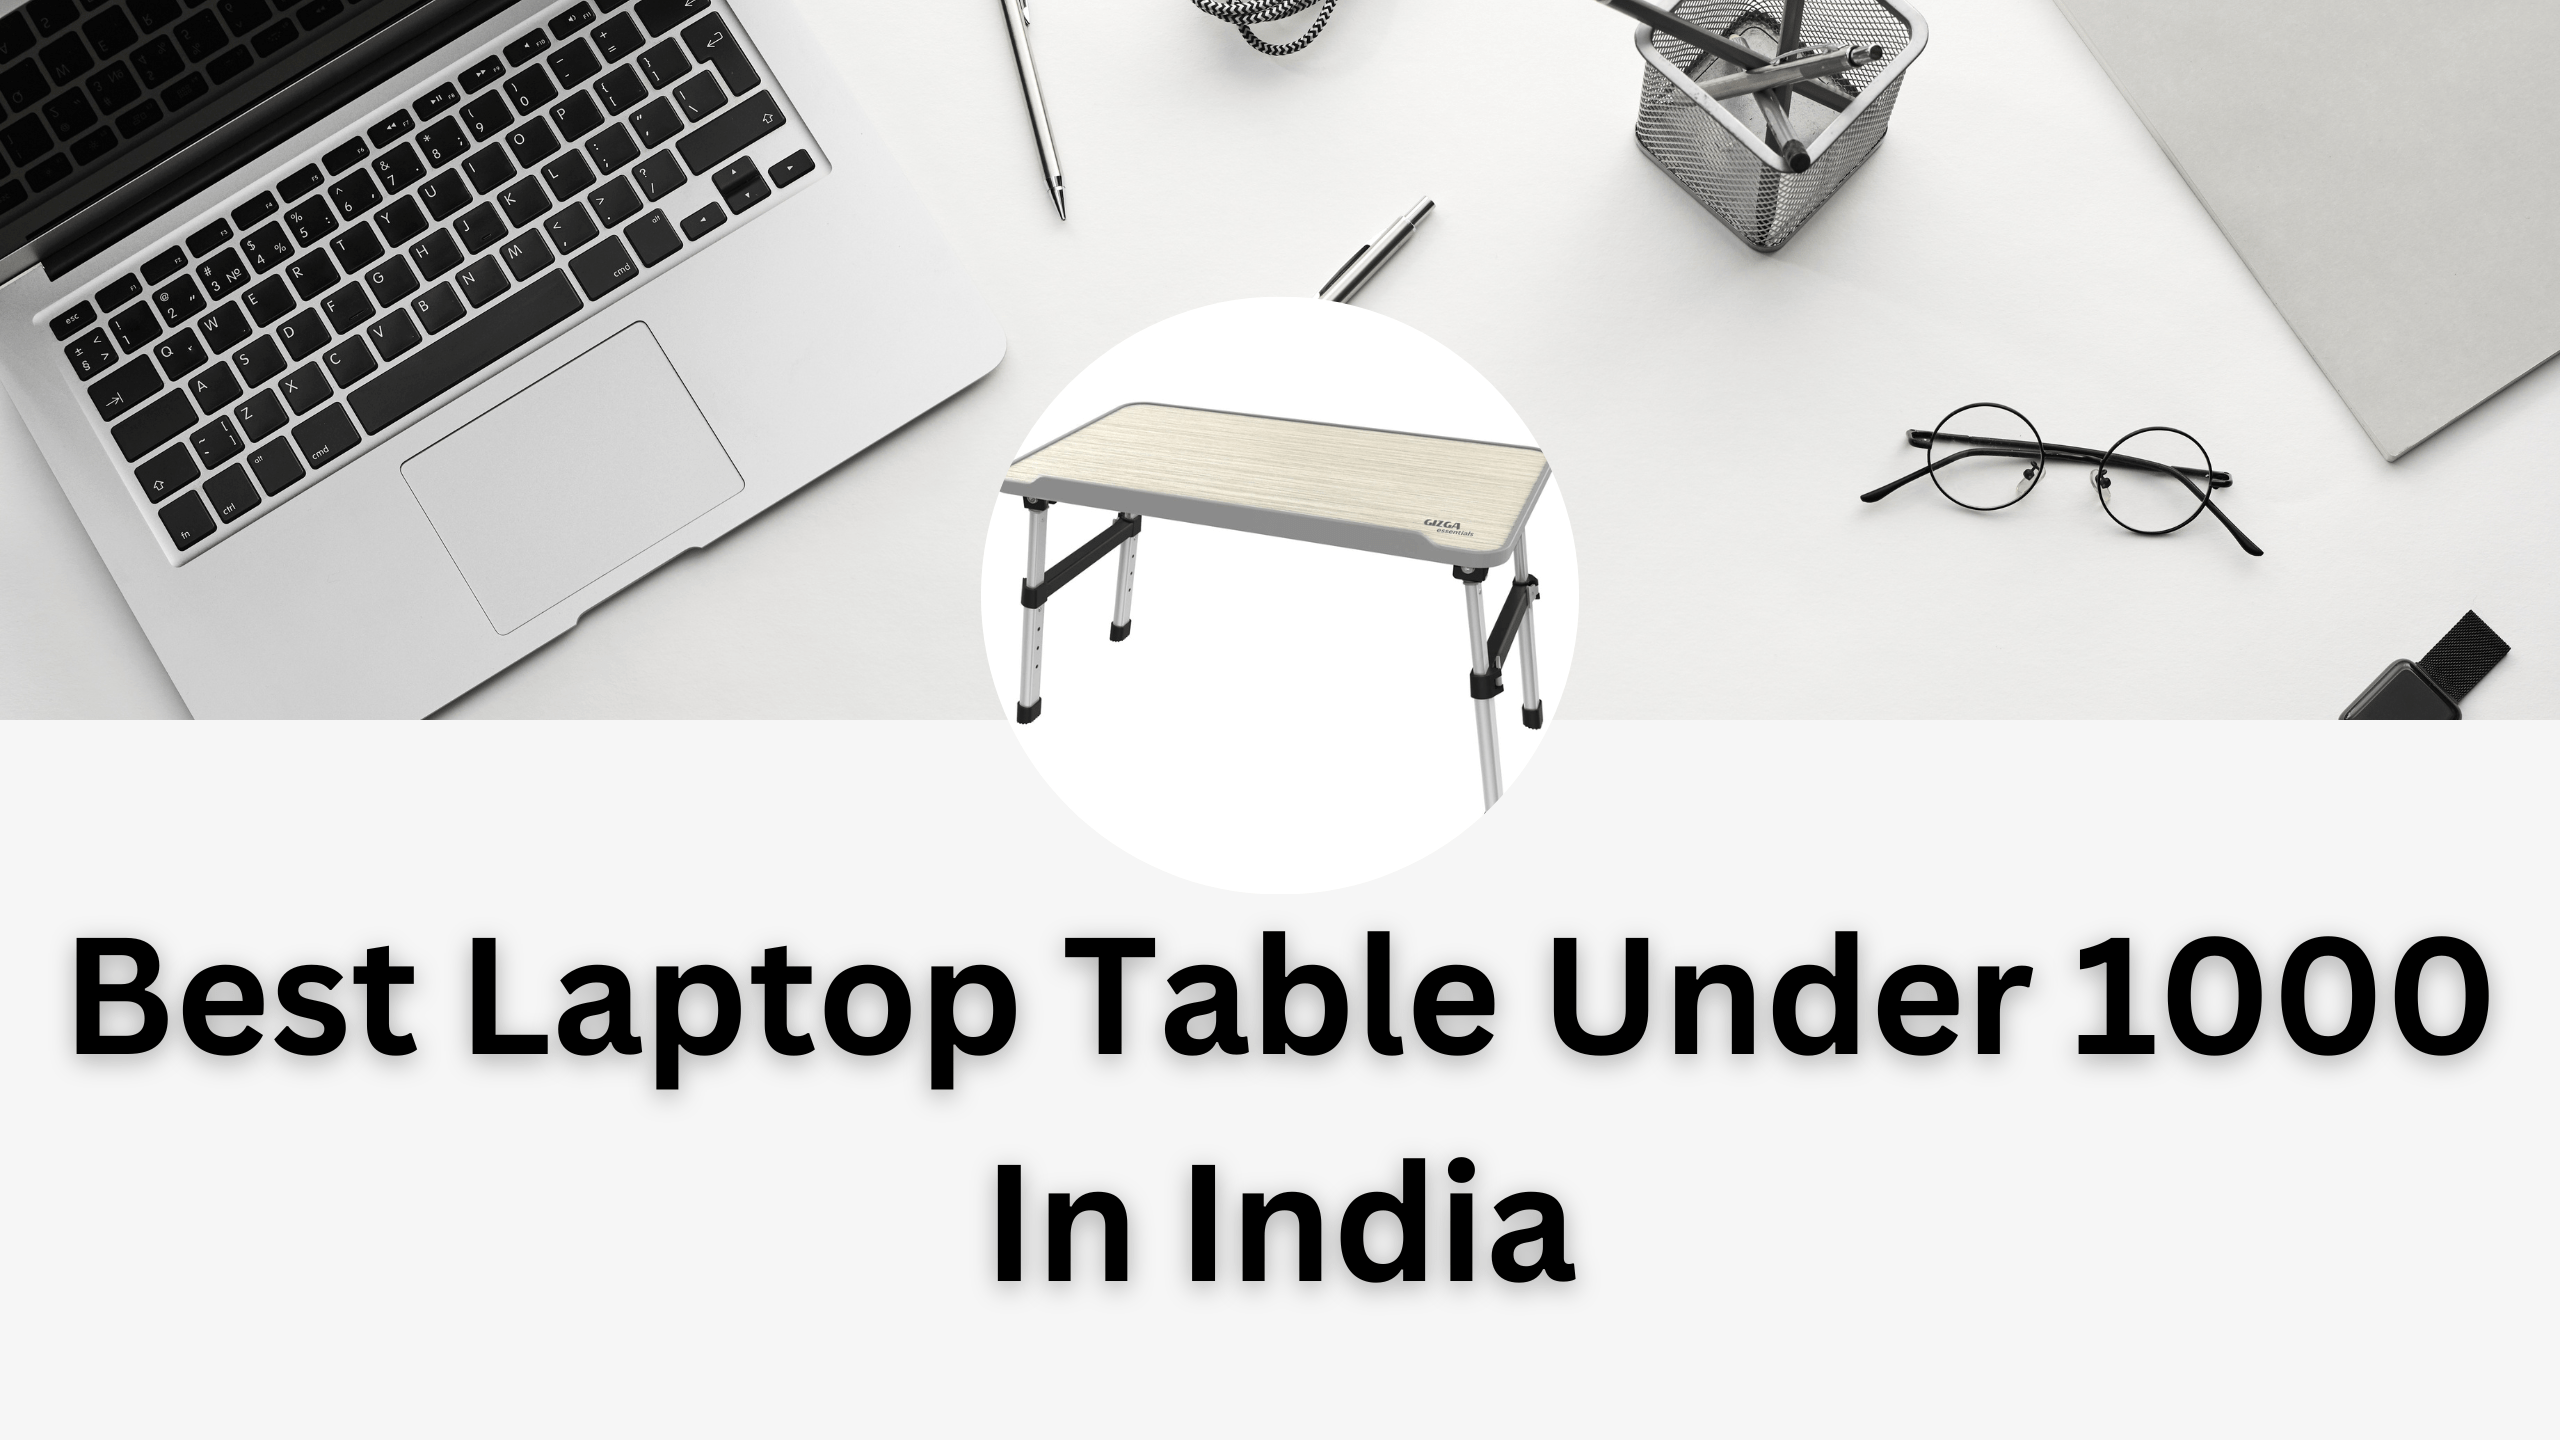 Best Laptop Table Under 1000 In India